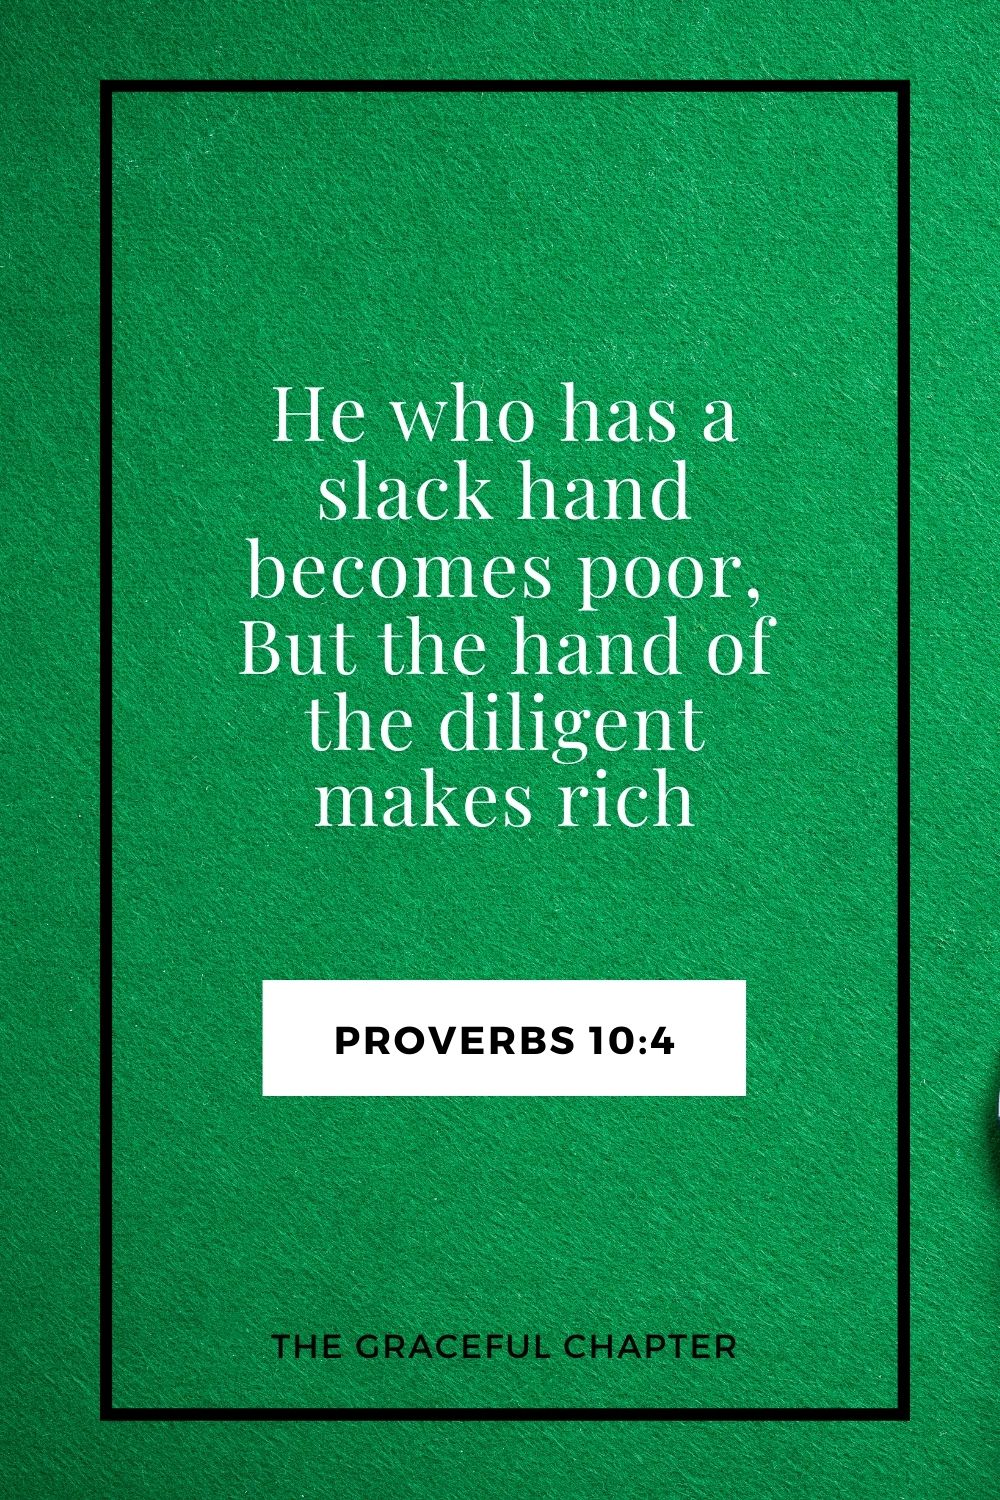 He who has a slack hand becomes poor, But the hand of the diligent makes rich Proverbs 10:4